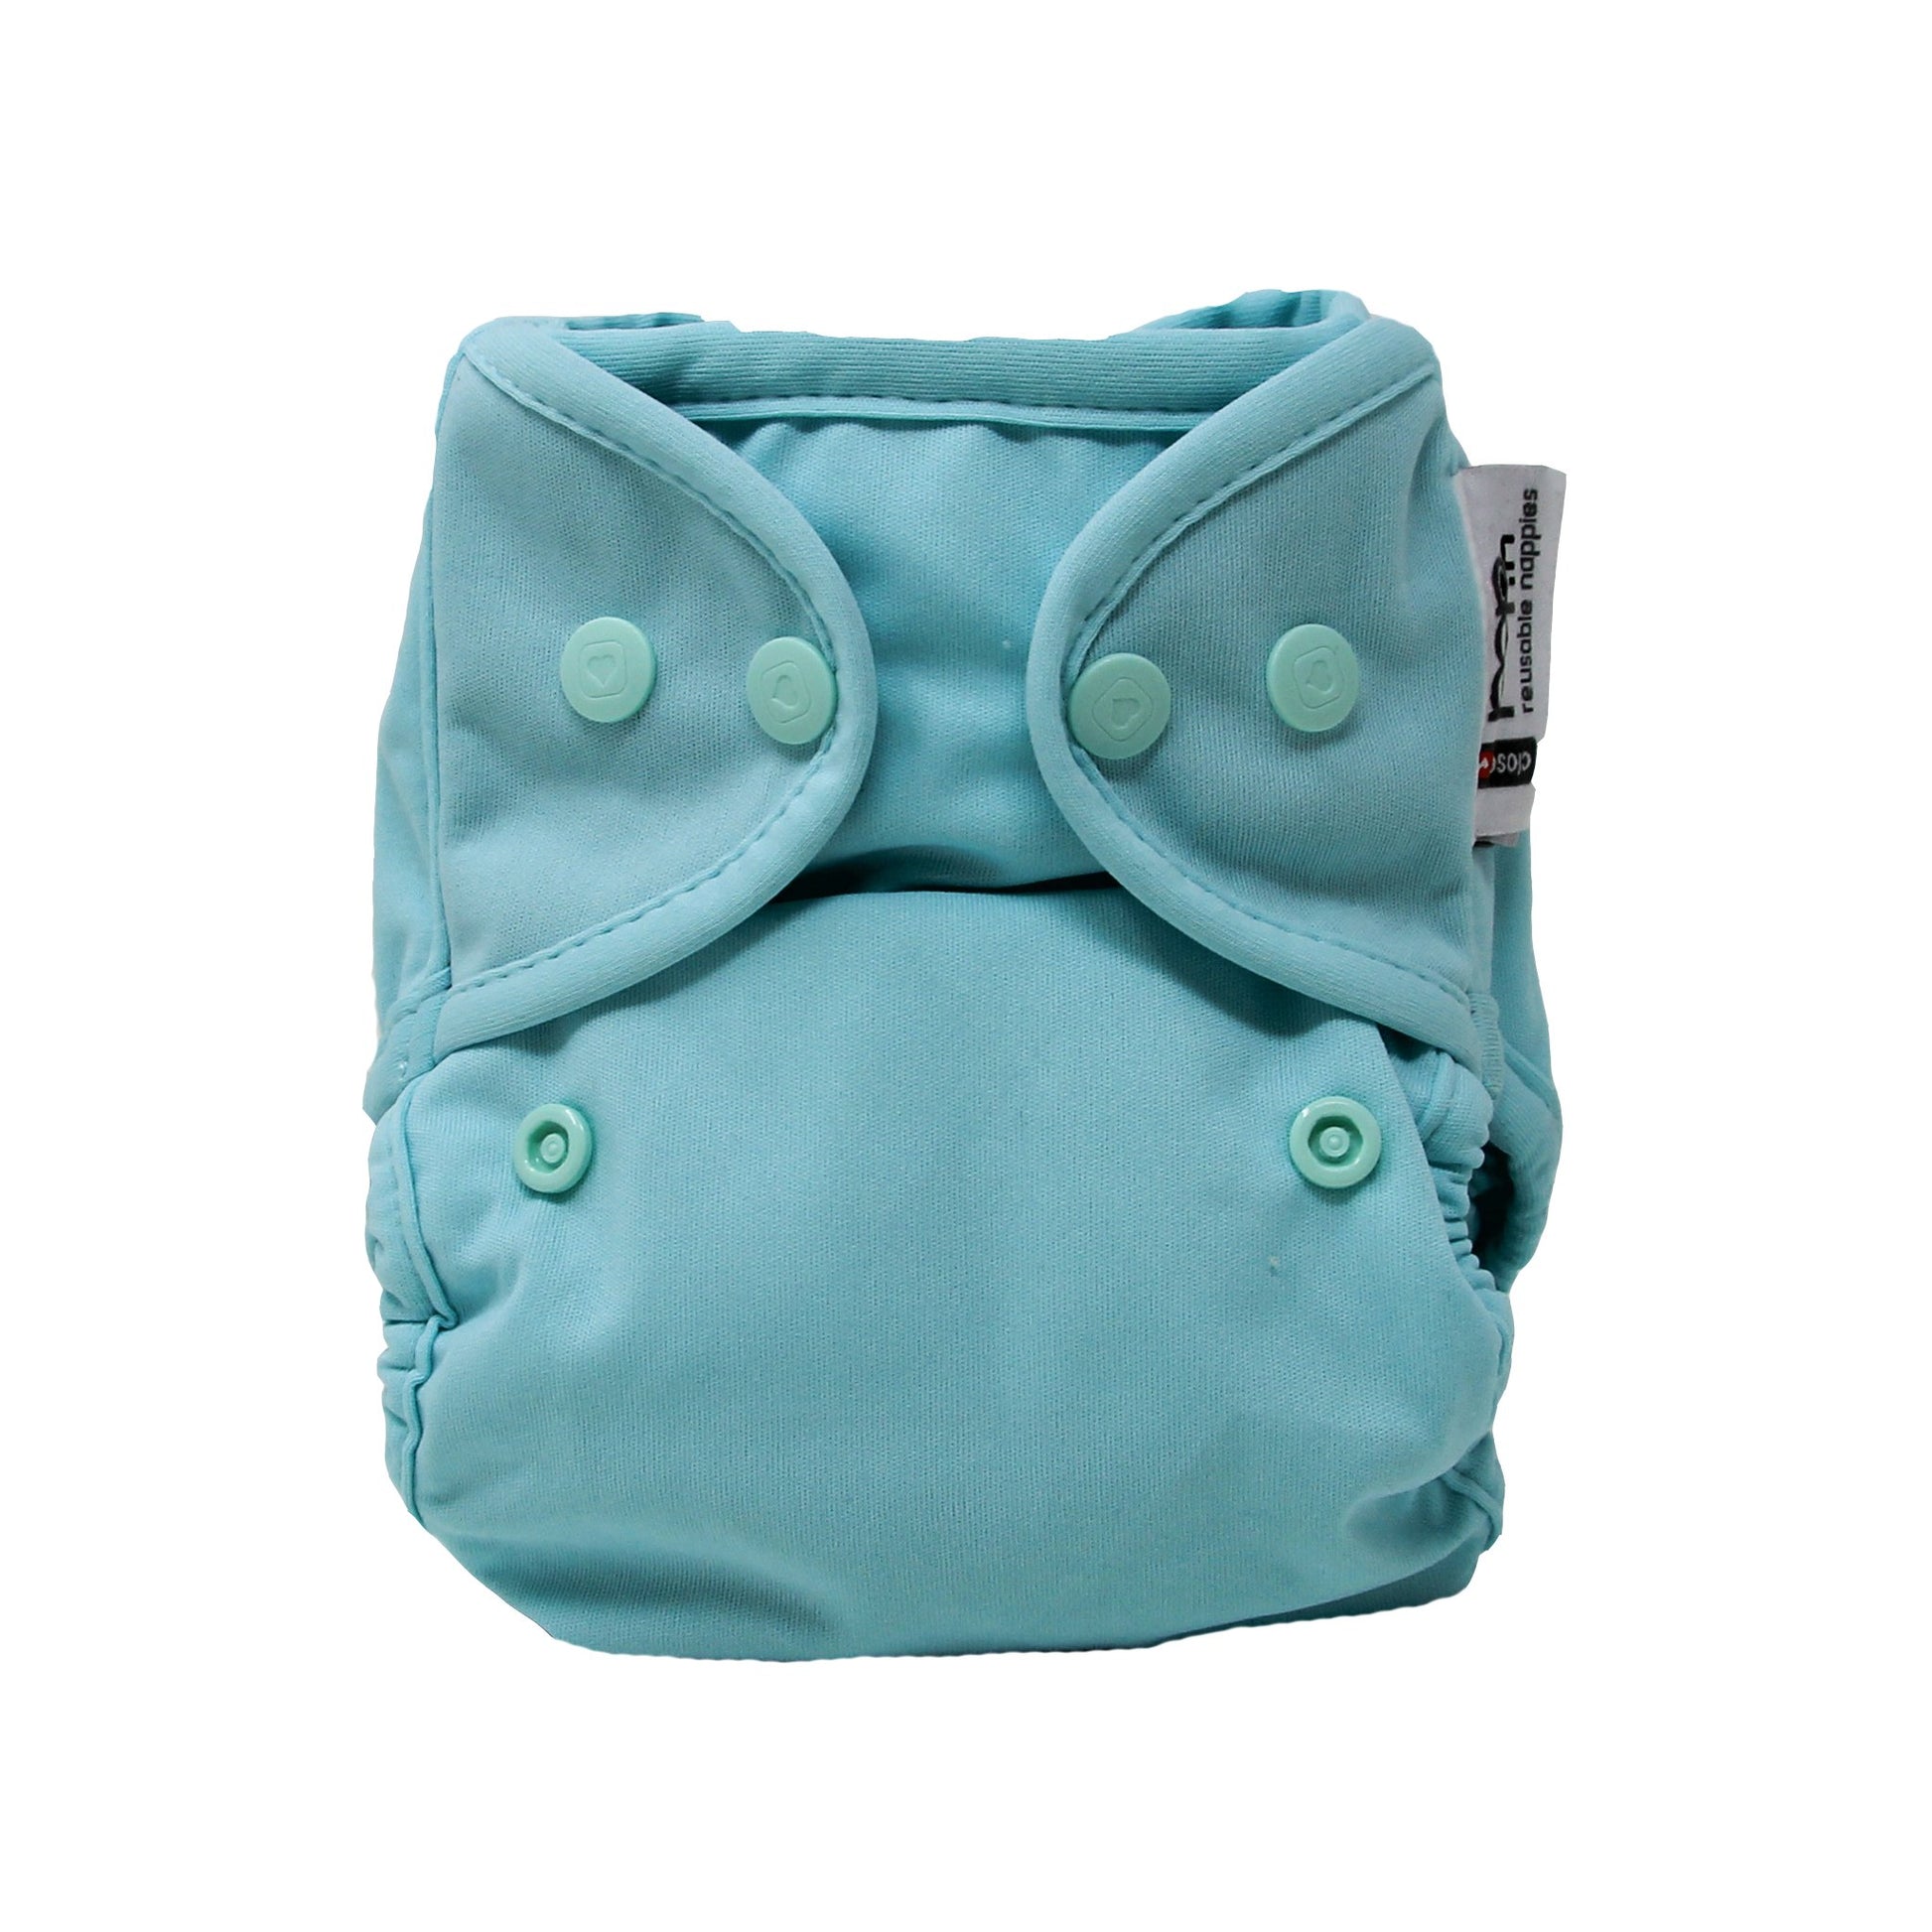 Image shows a pale blue reusable cloth nappy with popper fastening.